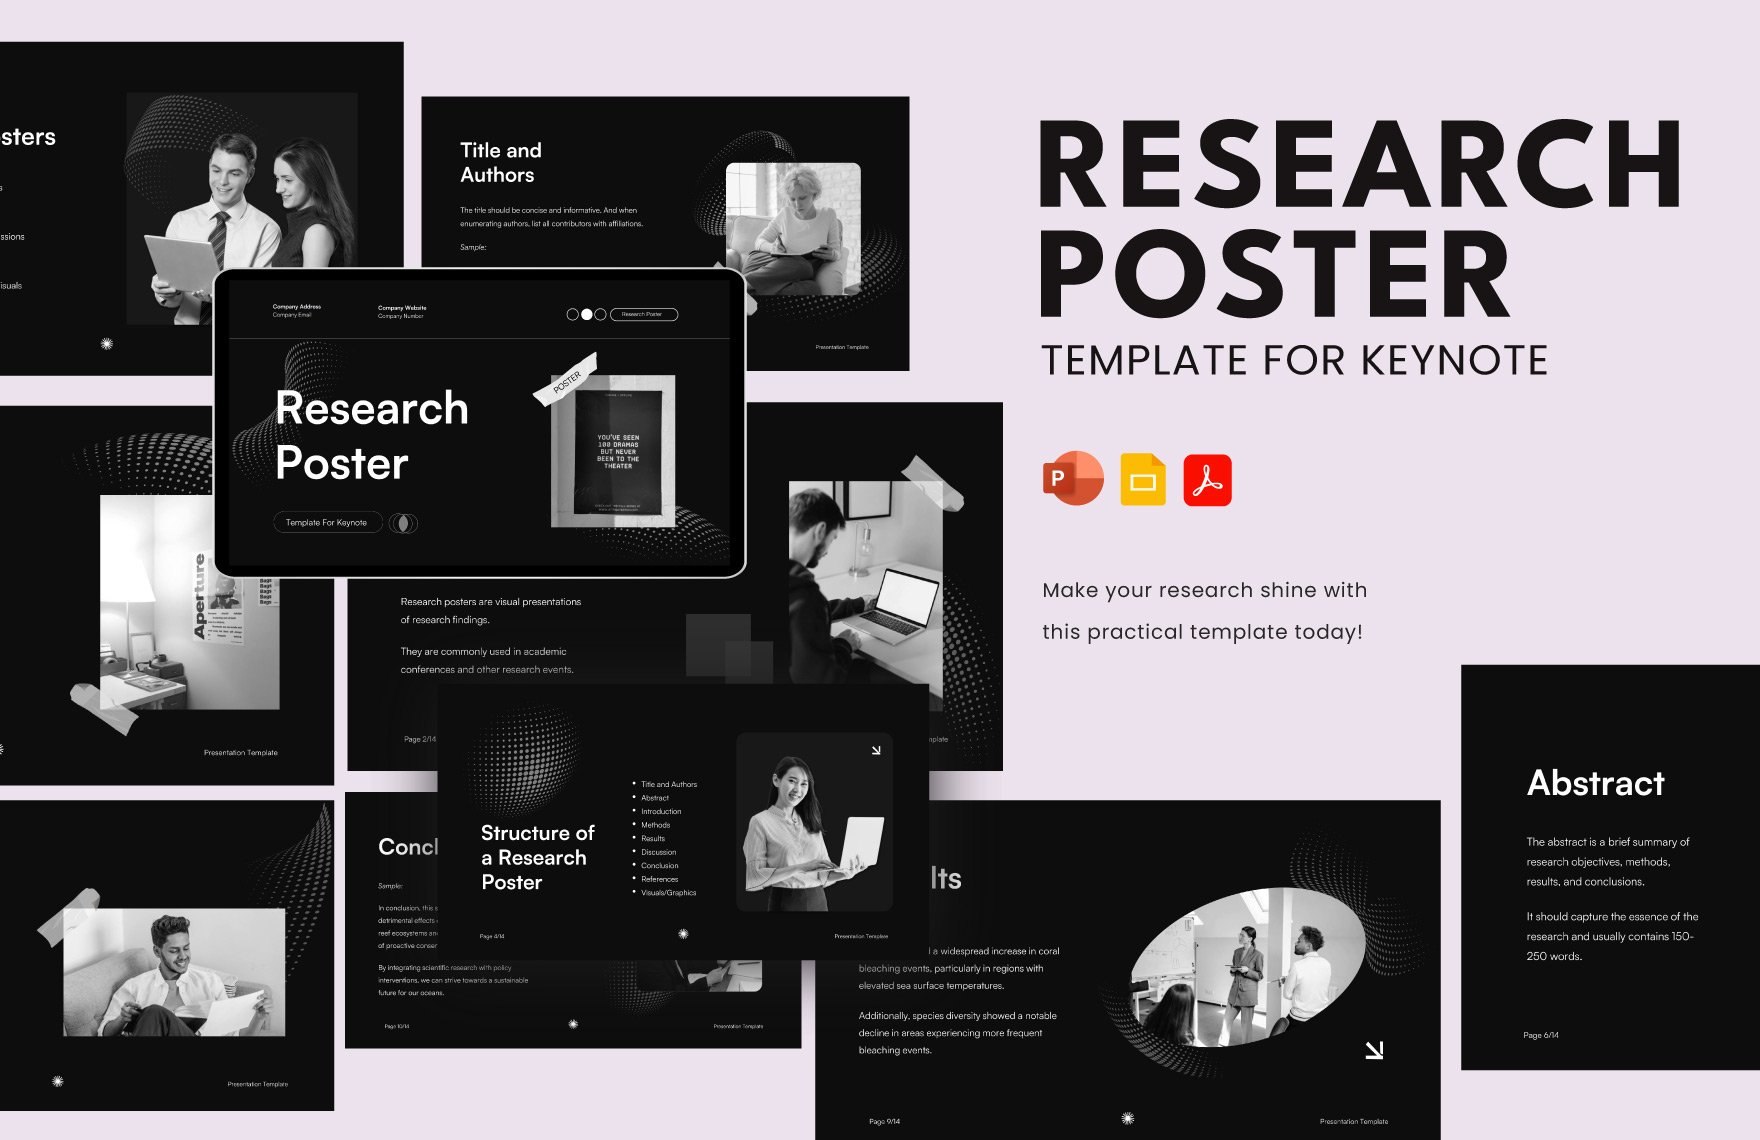 Research Poster Template for Keynote